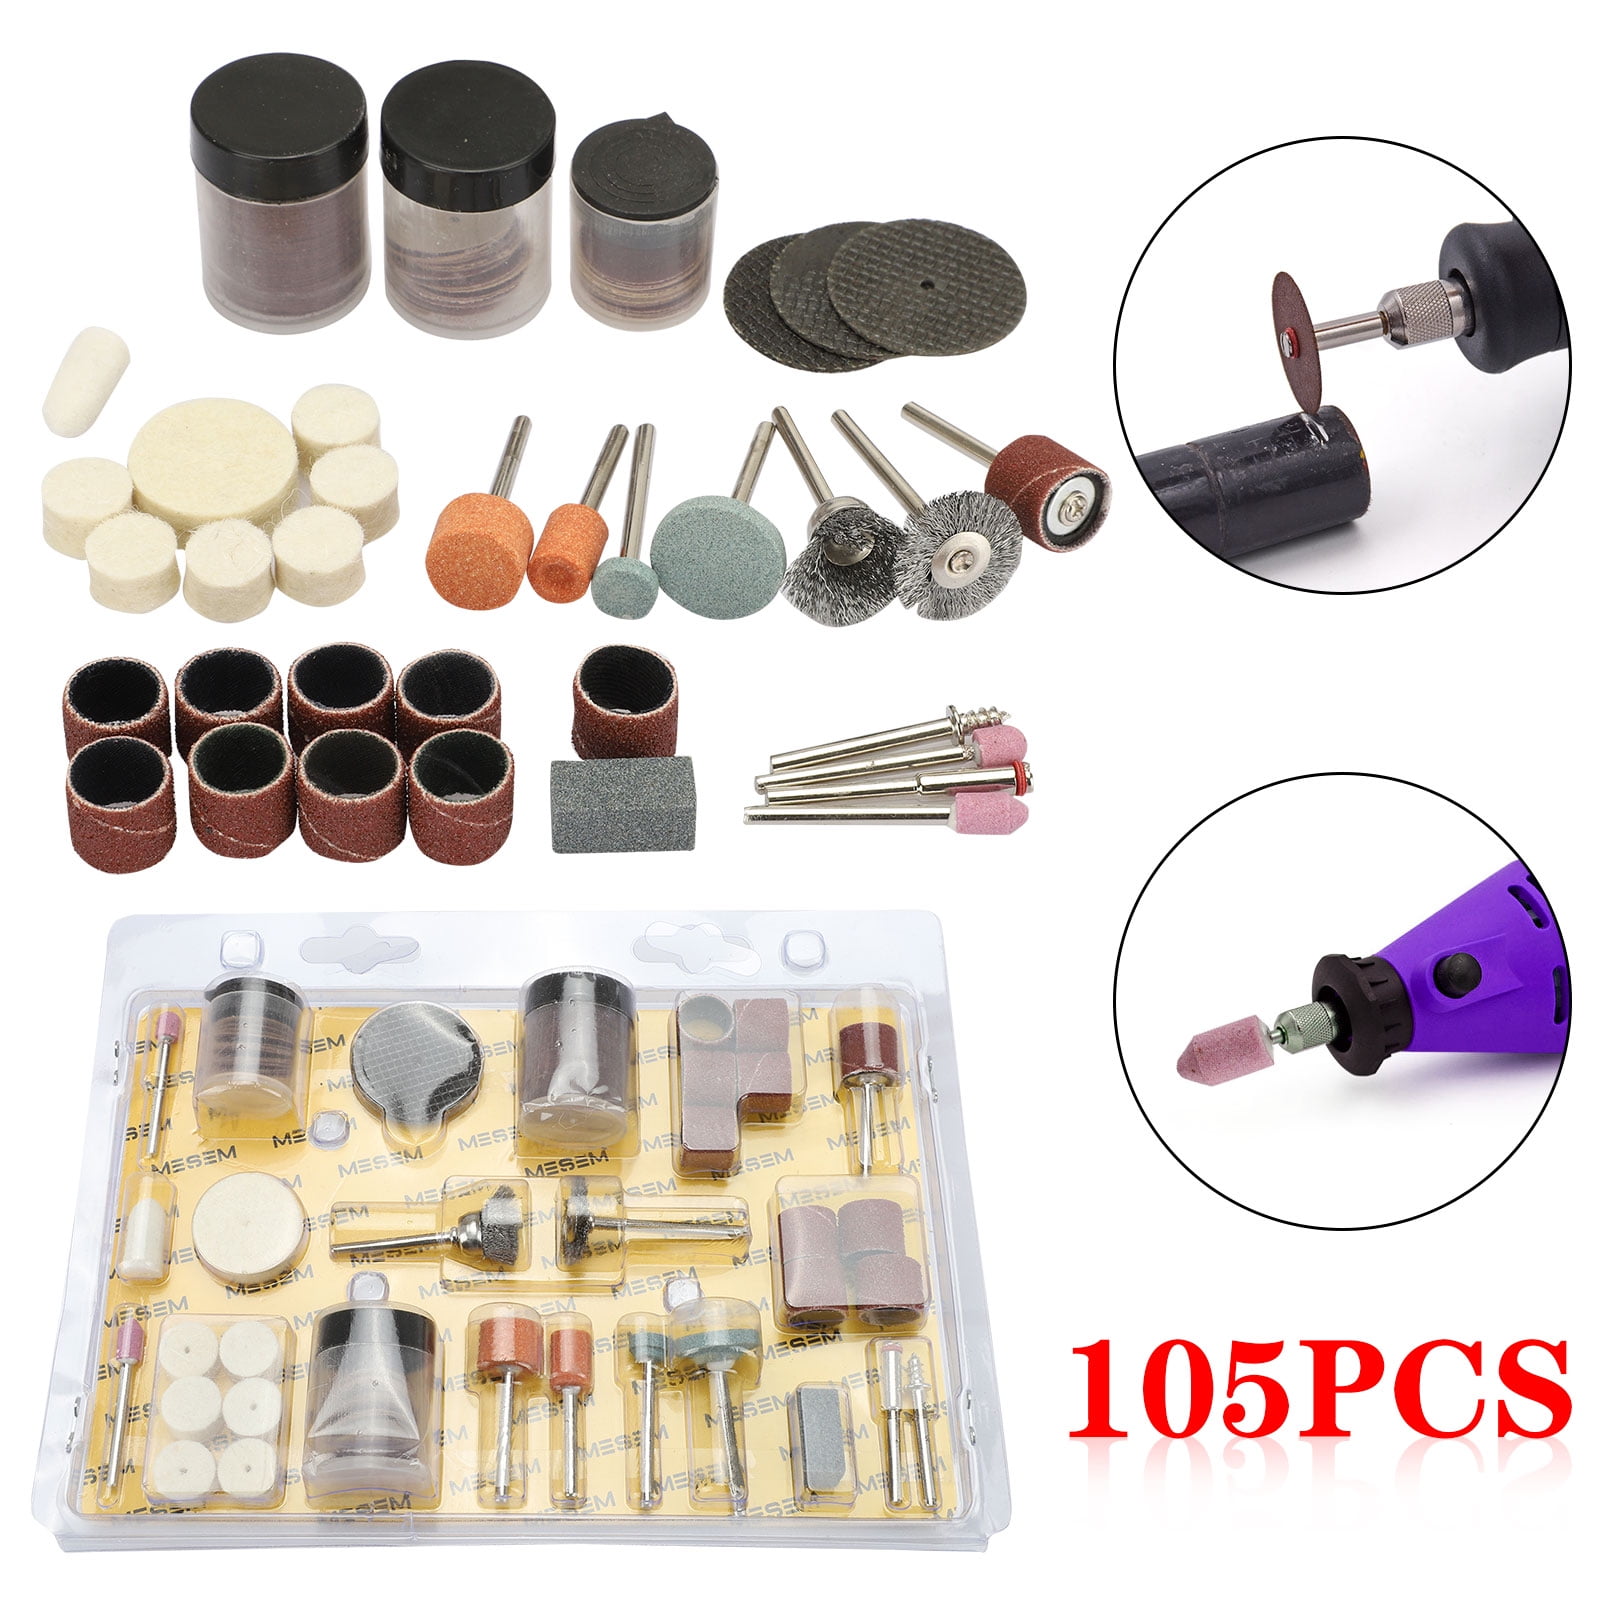 Winartton Electric Resin Polishing Kit, Resin Drill with 110 Accessories,  Rotary Tool for Resin Casting Molds, Resin Sander and Polishing Kit for